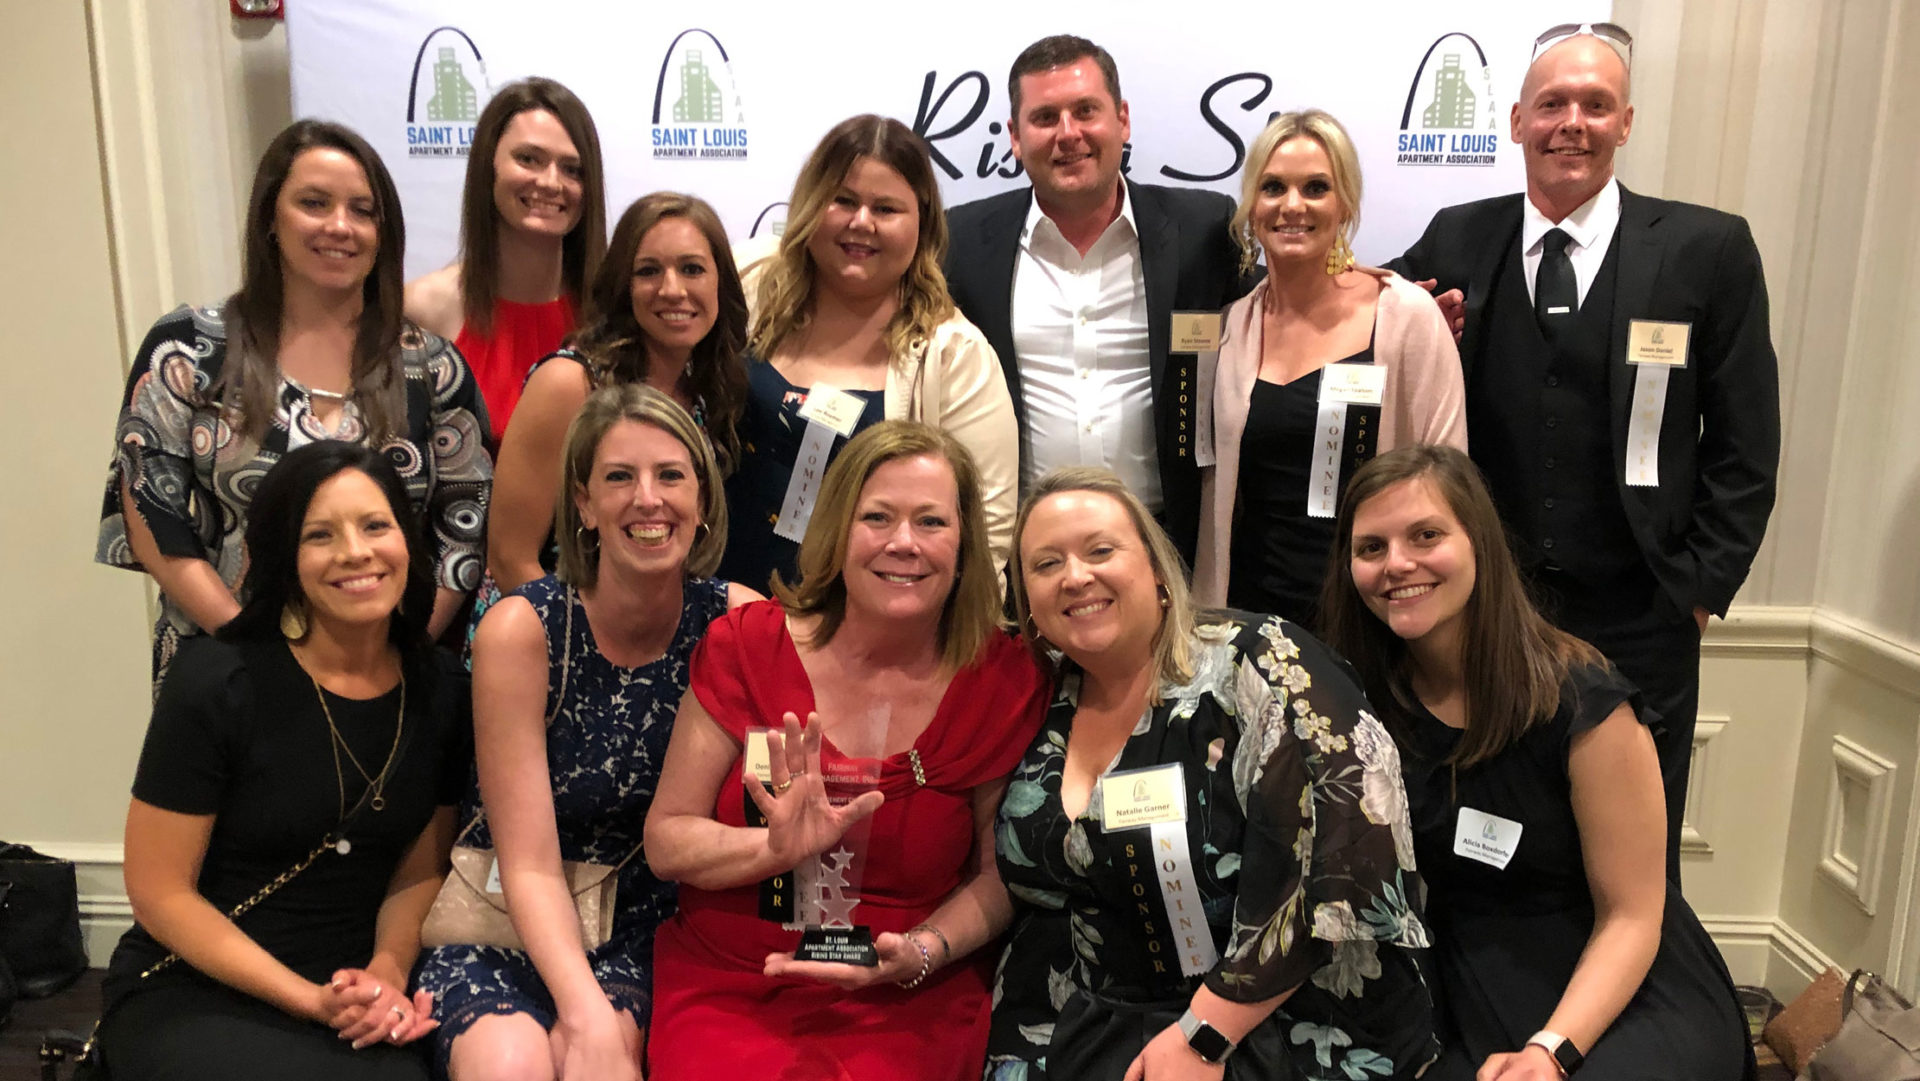 Recently, Fairway Management was awarded with the title of the St. Louis Apartment Association’s (SLAA) Management Company of the Year.